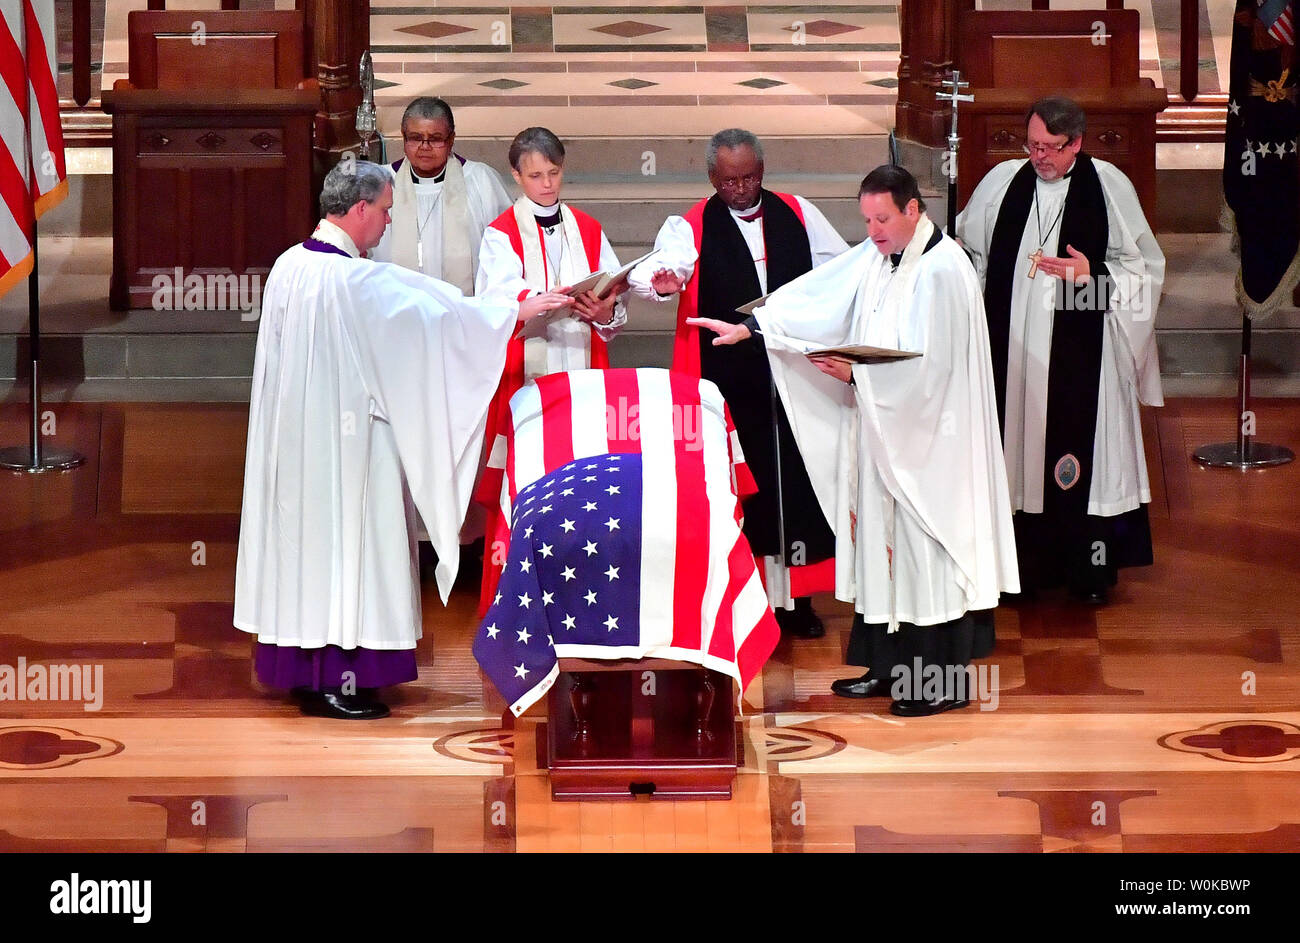 Members of the clergy pray over the casket of President George H.W. Bush during his funeral at the National Cathedral, in Washington D.C. on December 5, 2018. Photo by Kevin Dietsch/UPI Stock Photo